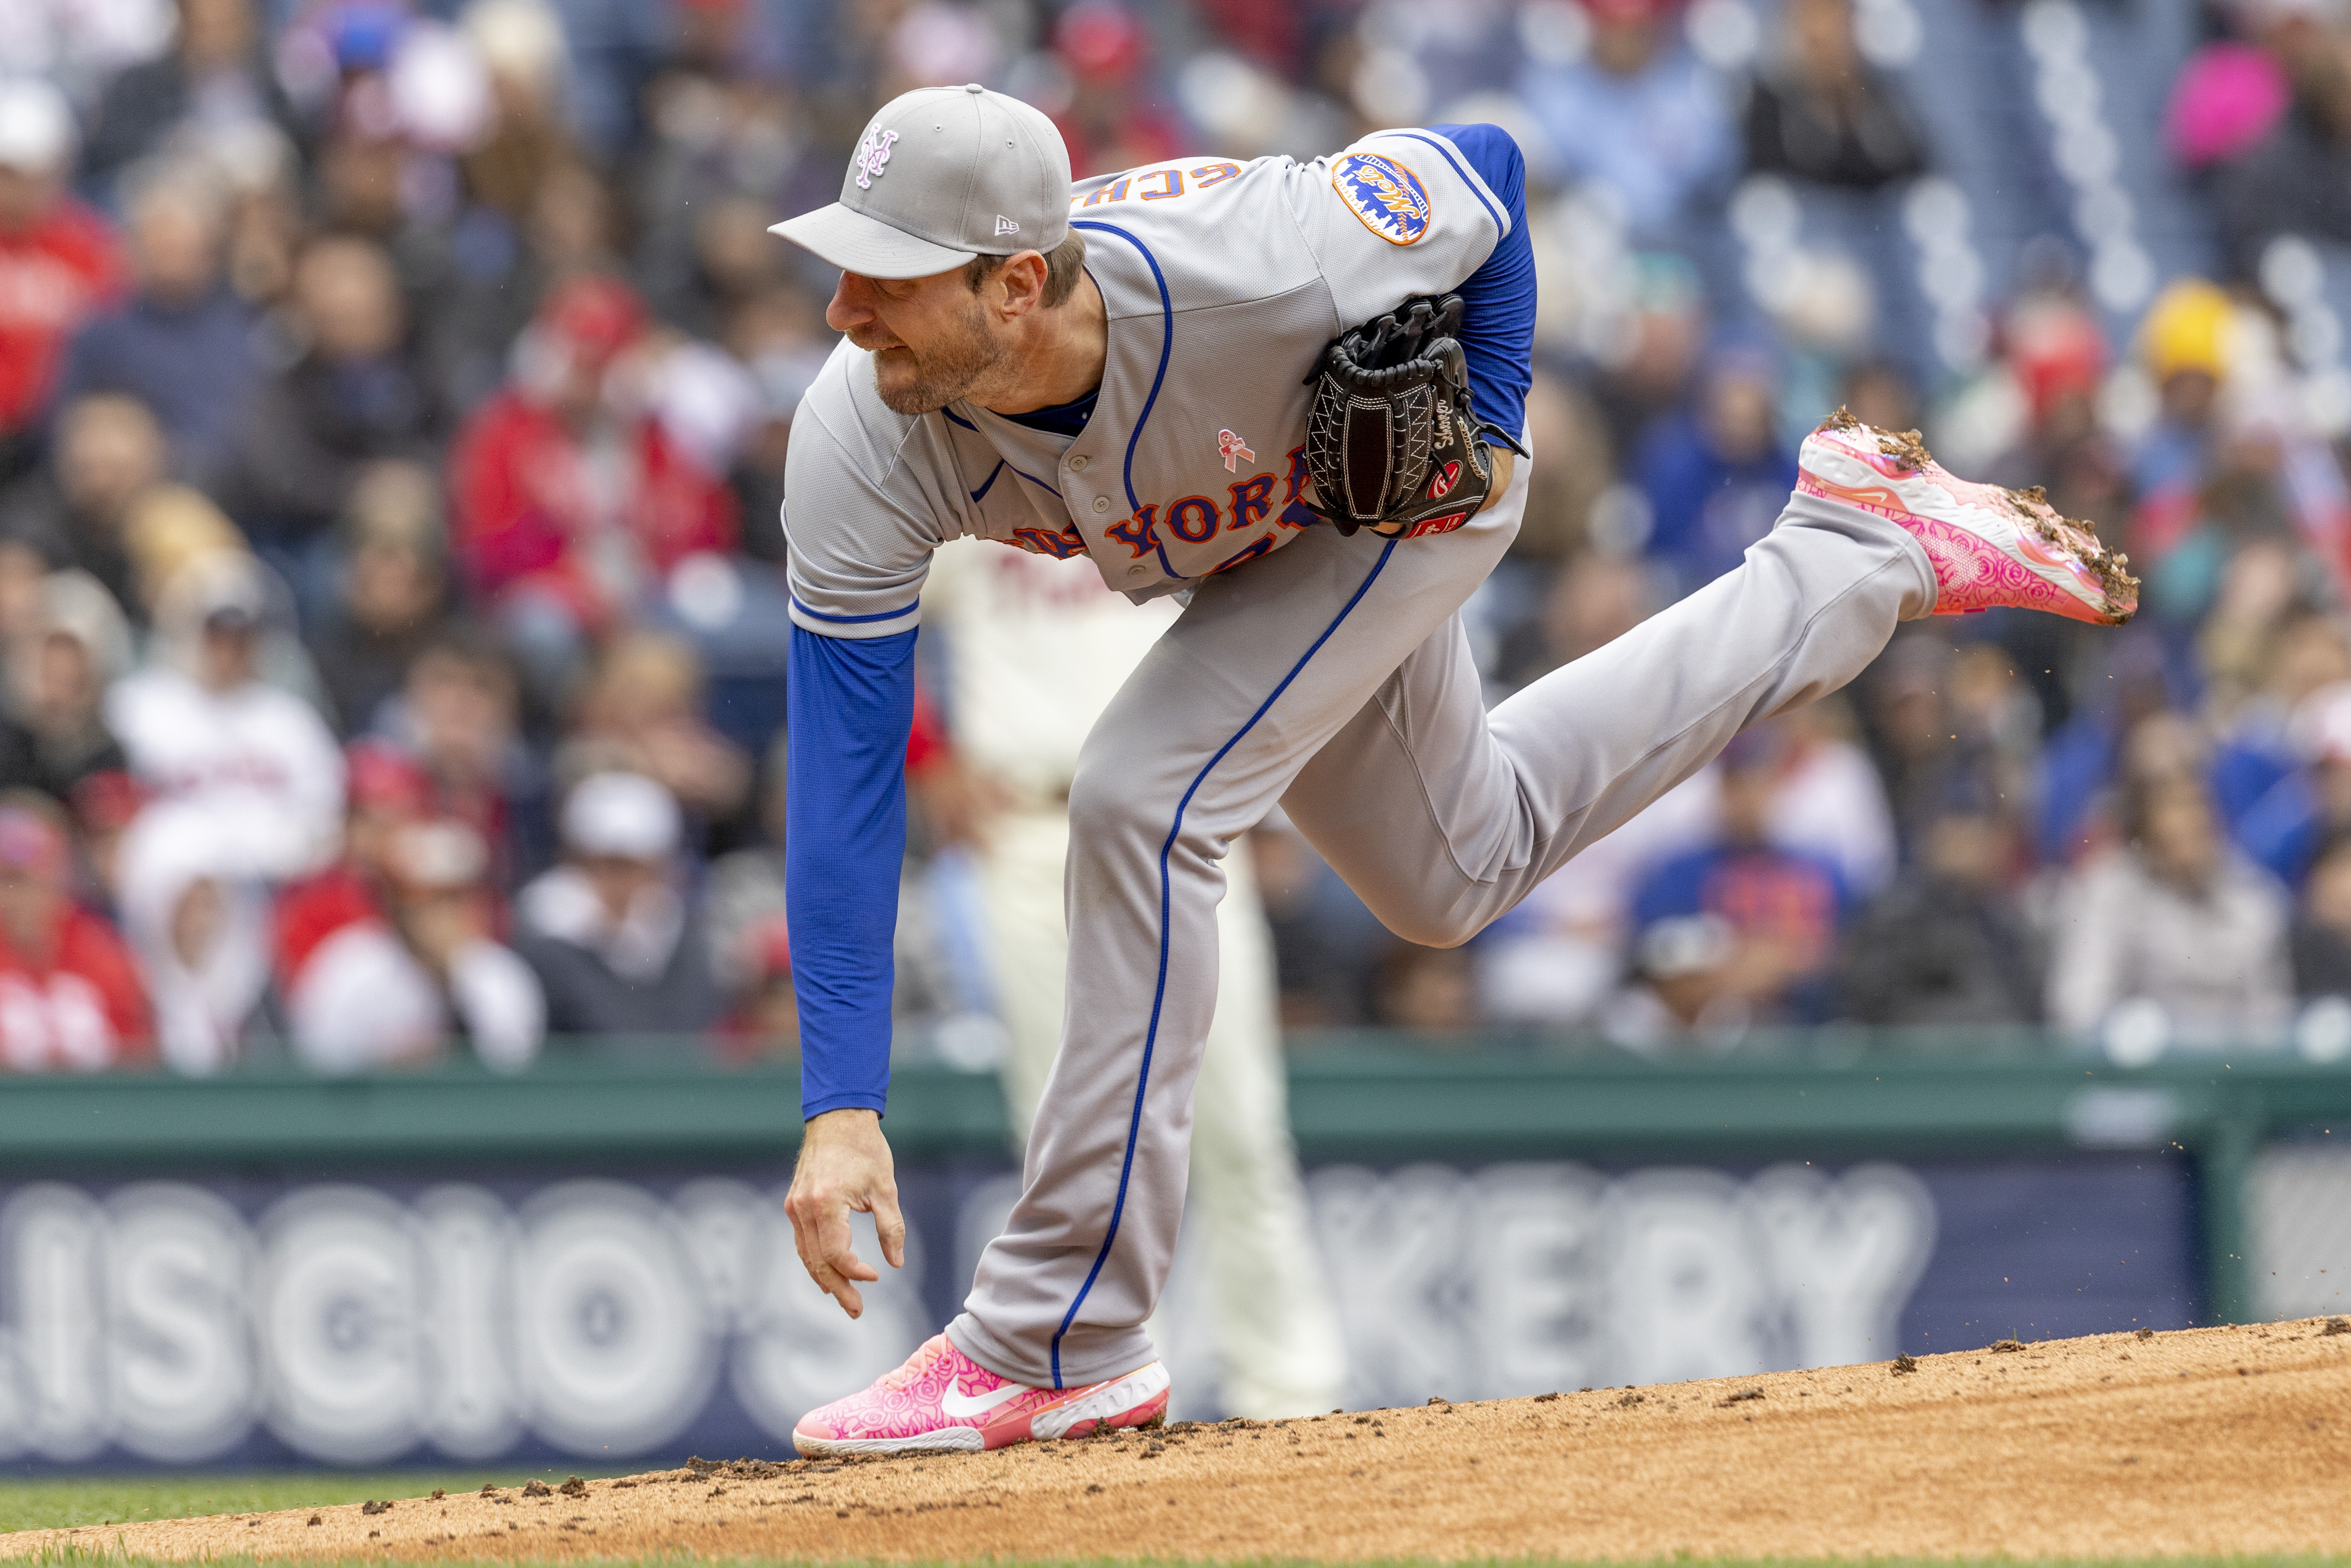 Mets vs Nationals Highlights: Brandon Nimmo puts on a show as Mets win  first of doubleheader